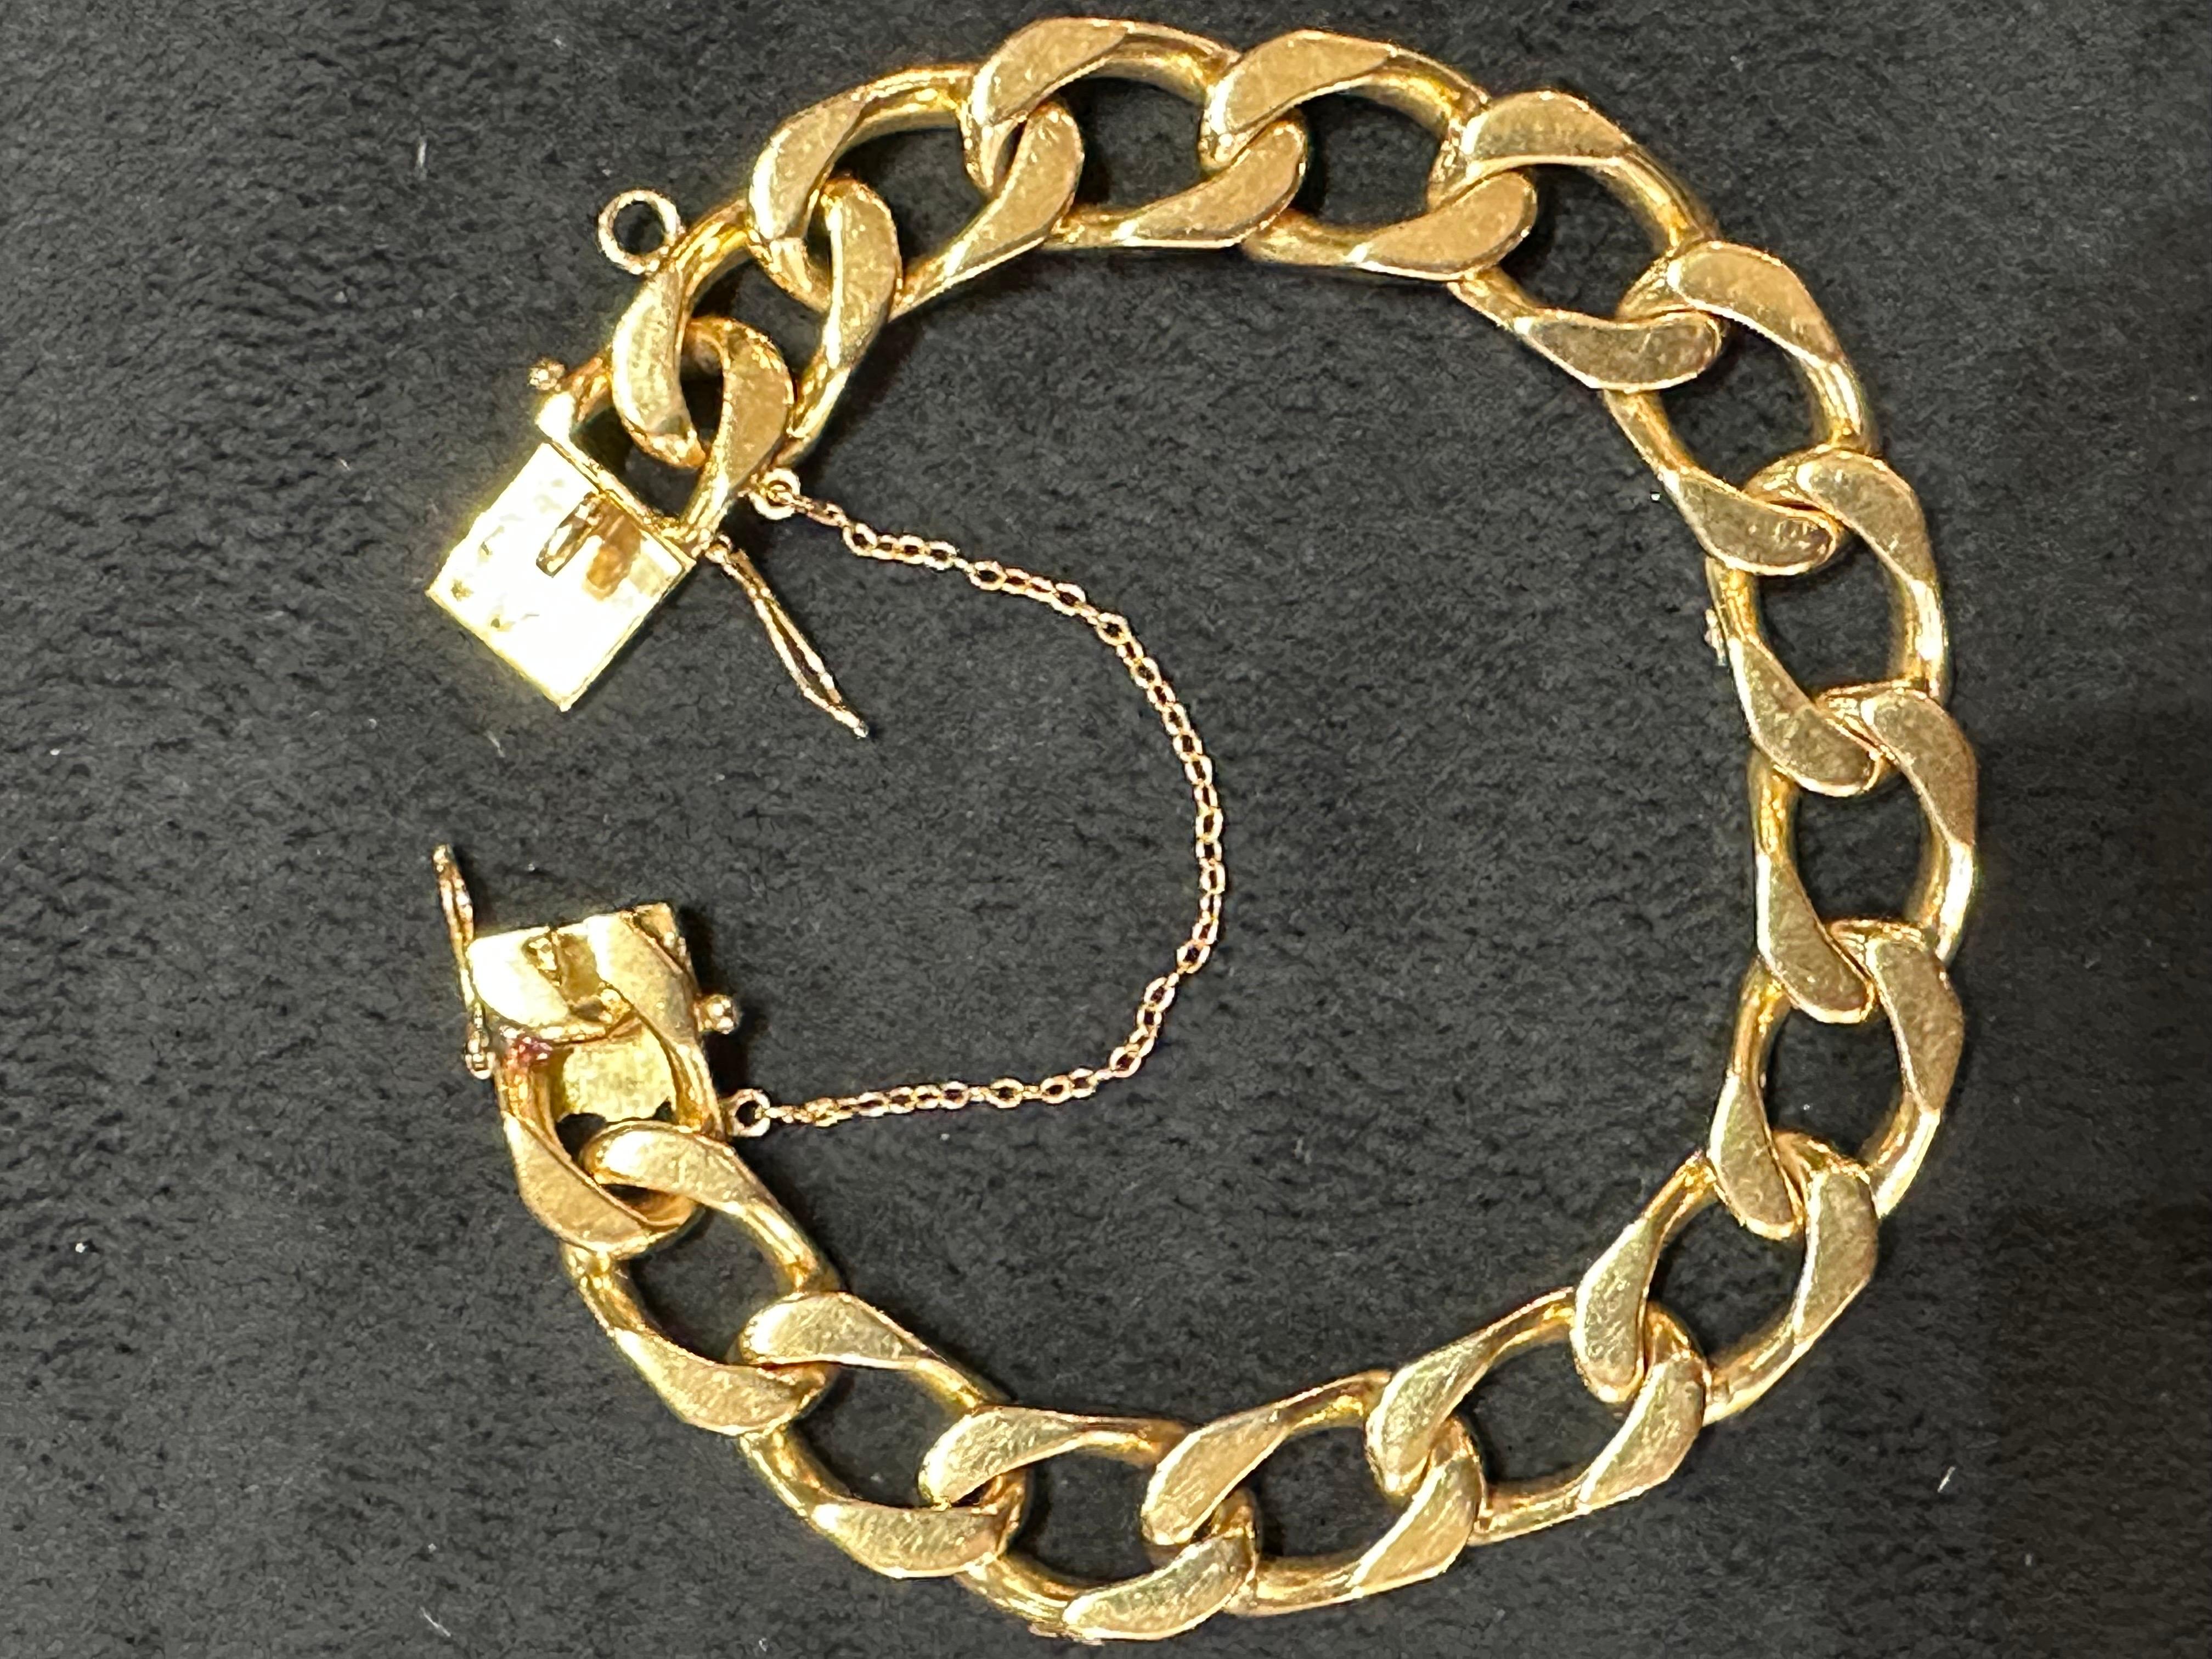 Bracelet Mesh Gourmette Year 1960 Solid Gold 18 Carats 13